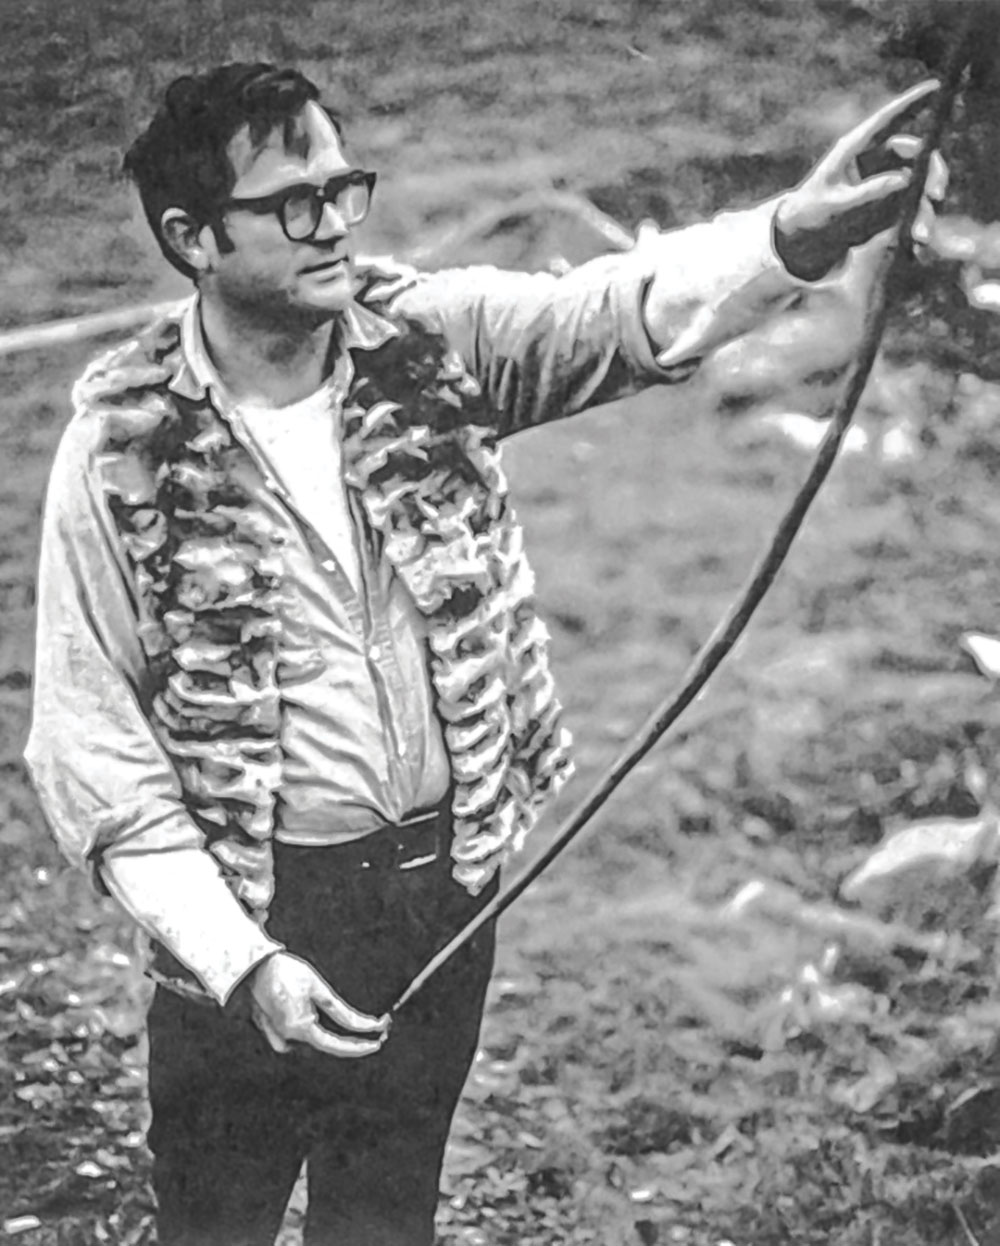 Olsen does a final check of his field bow, which was made under primitive conditions. (Photo: courtesy of Olsen’s publisher, Chicago Review Press)